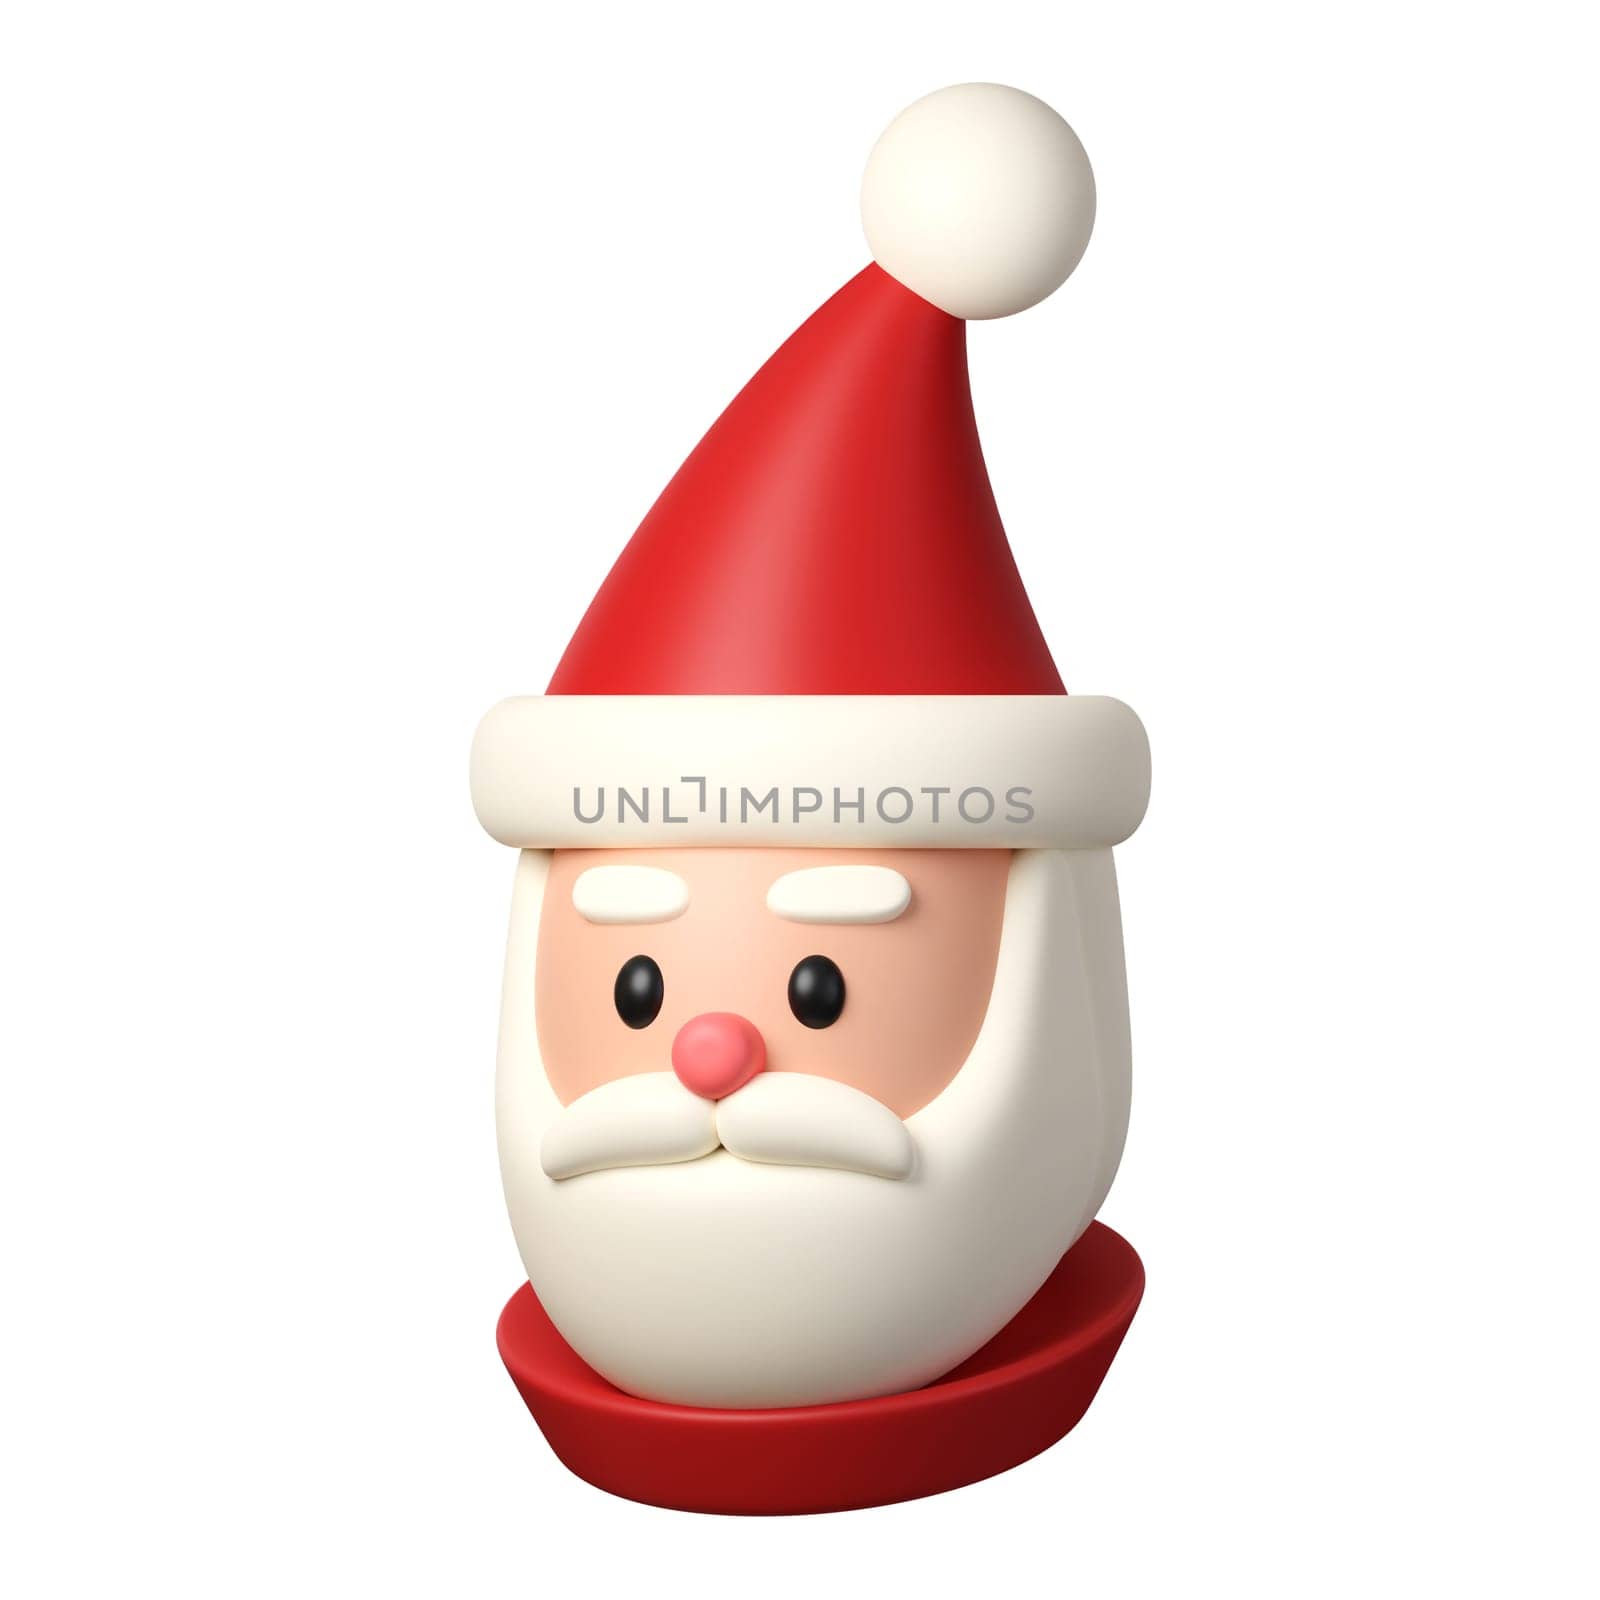 3d Christmas santa claus icon. minimal decorative festive conical shape tree. New Year's holiday decor. 3d design element In cartoon style. Icon isolated on white background. 3d illustration.